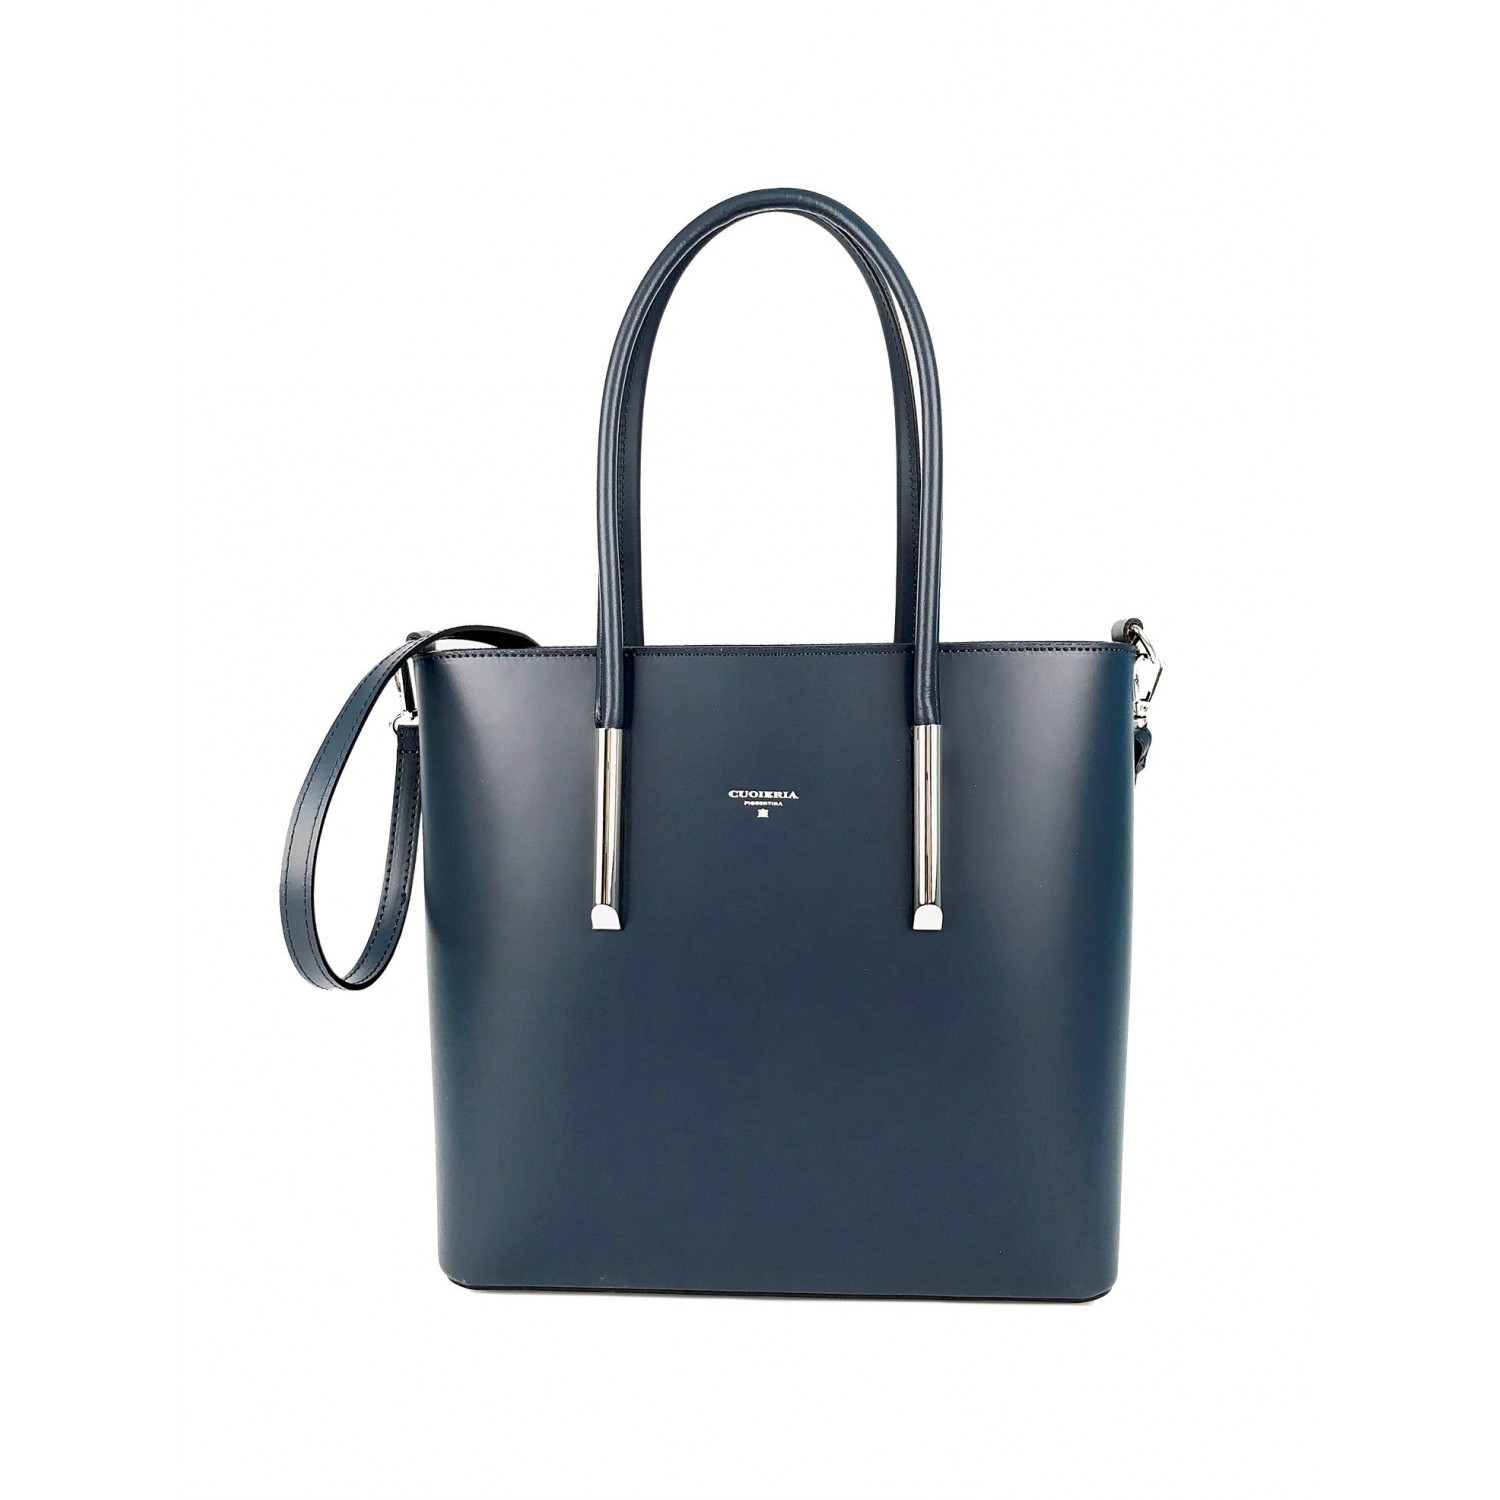 Calf smooth shopping bag - Leather Shopping Bags - Women's Bags - Bags